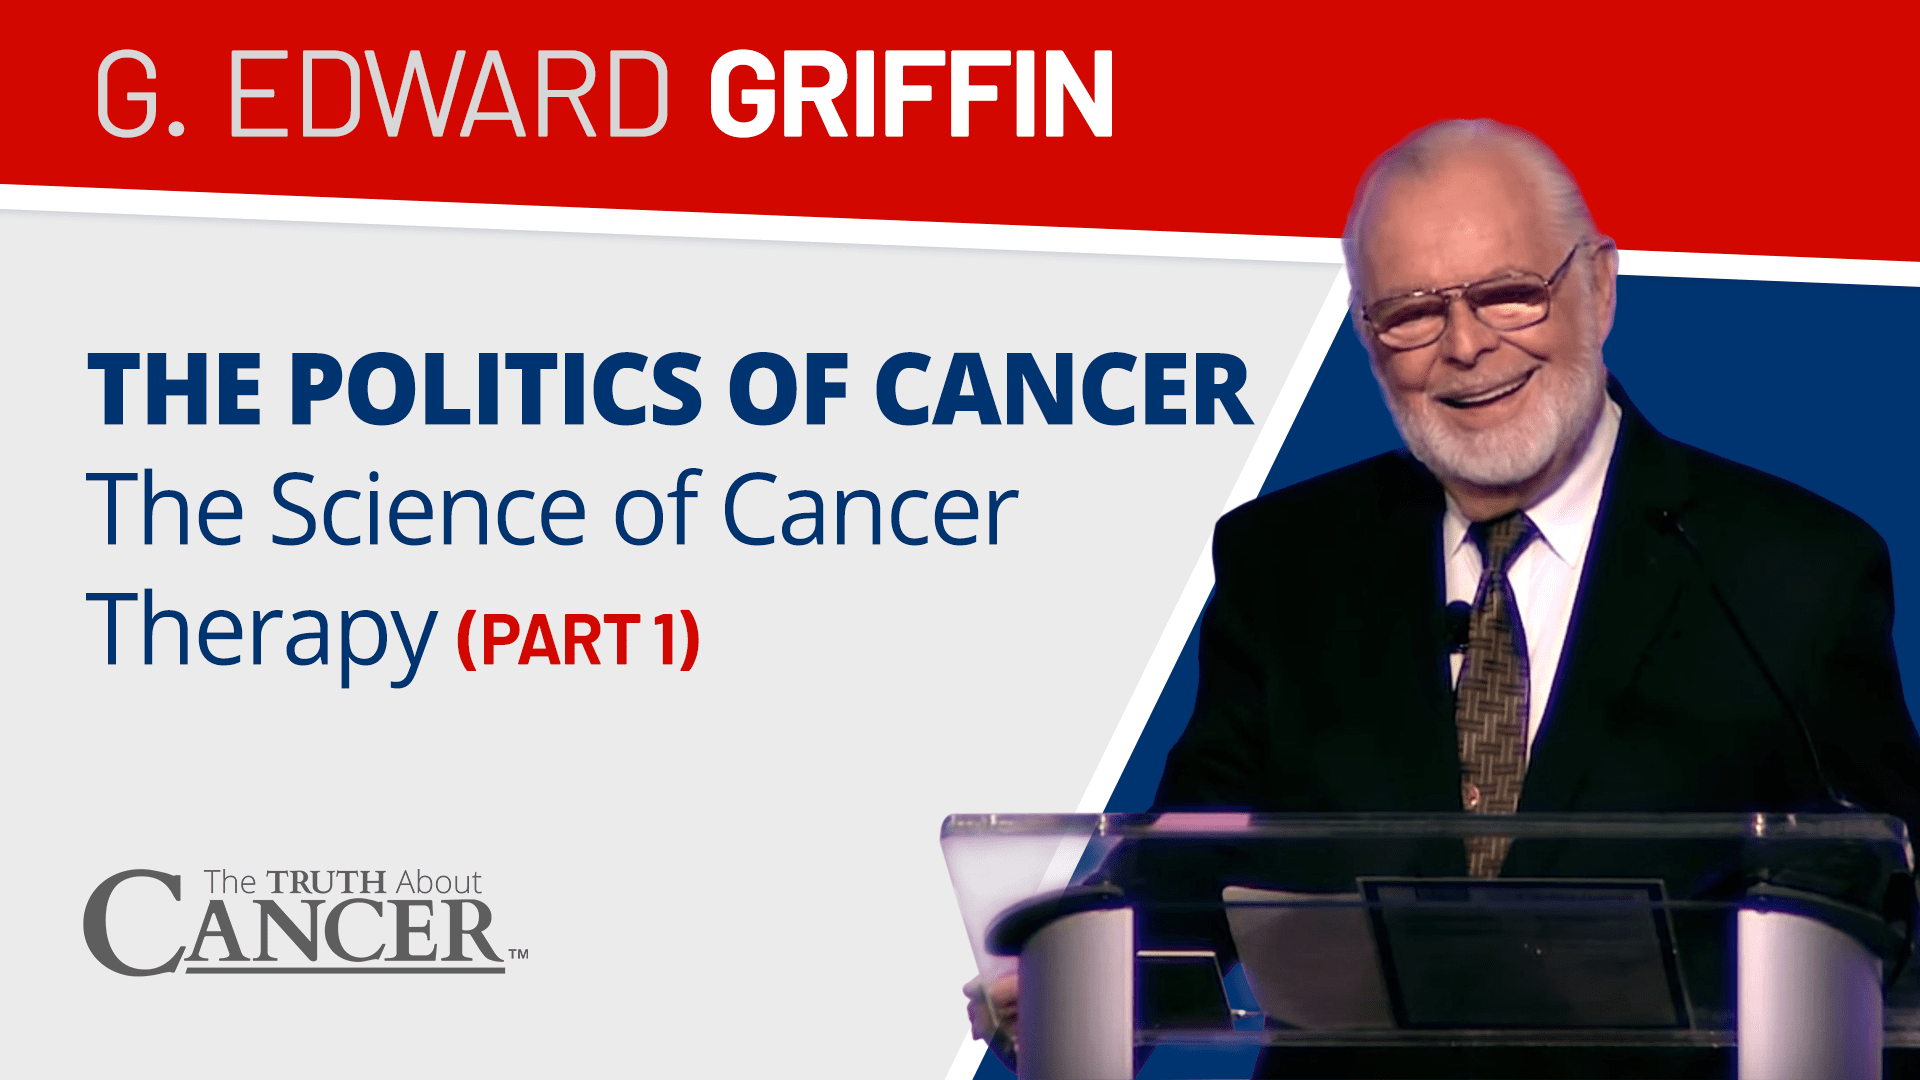 the politics of cancer with g. edward griffin